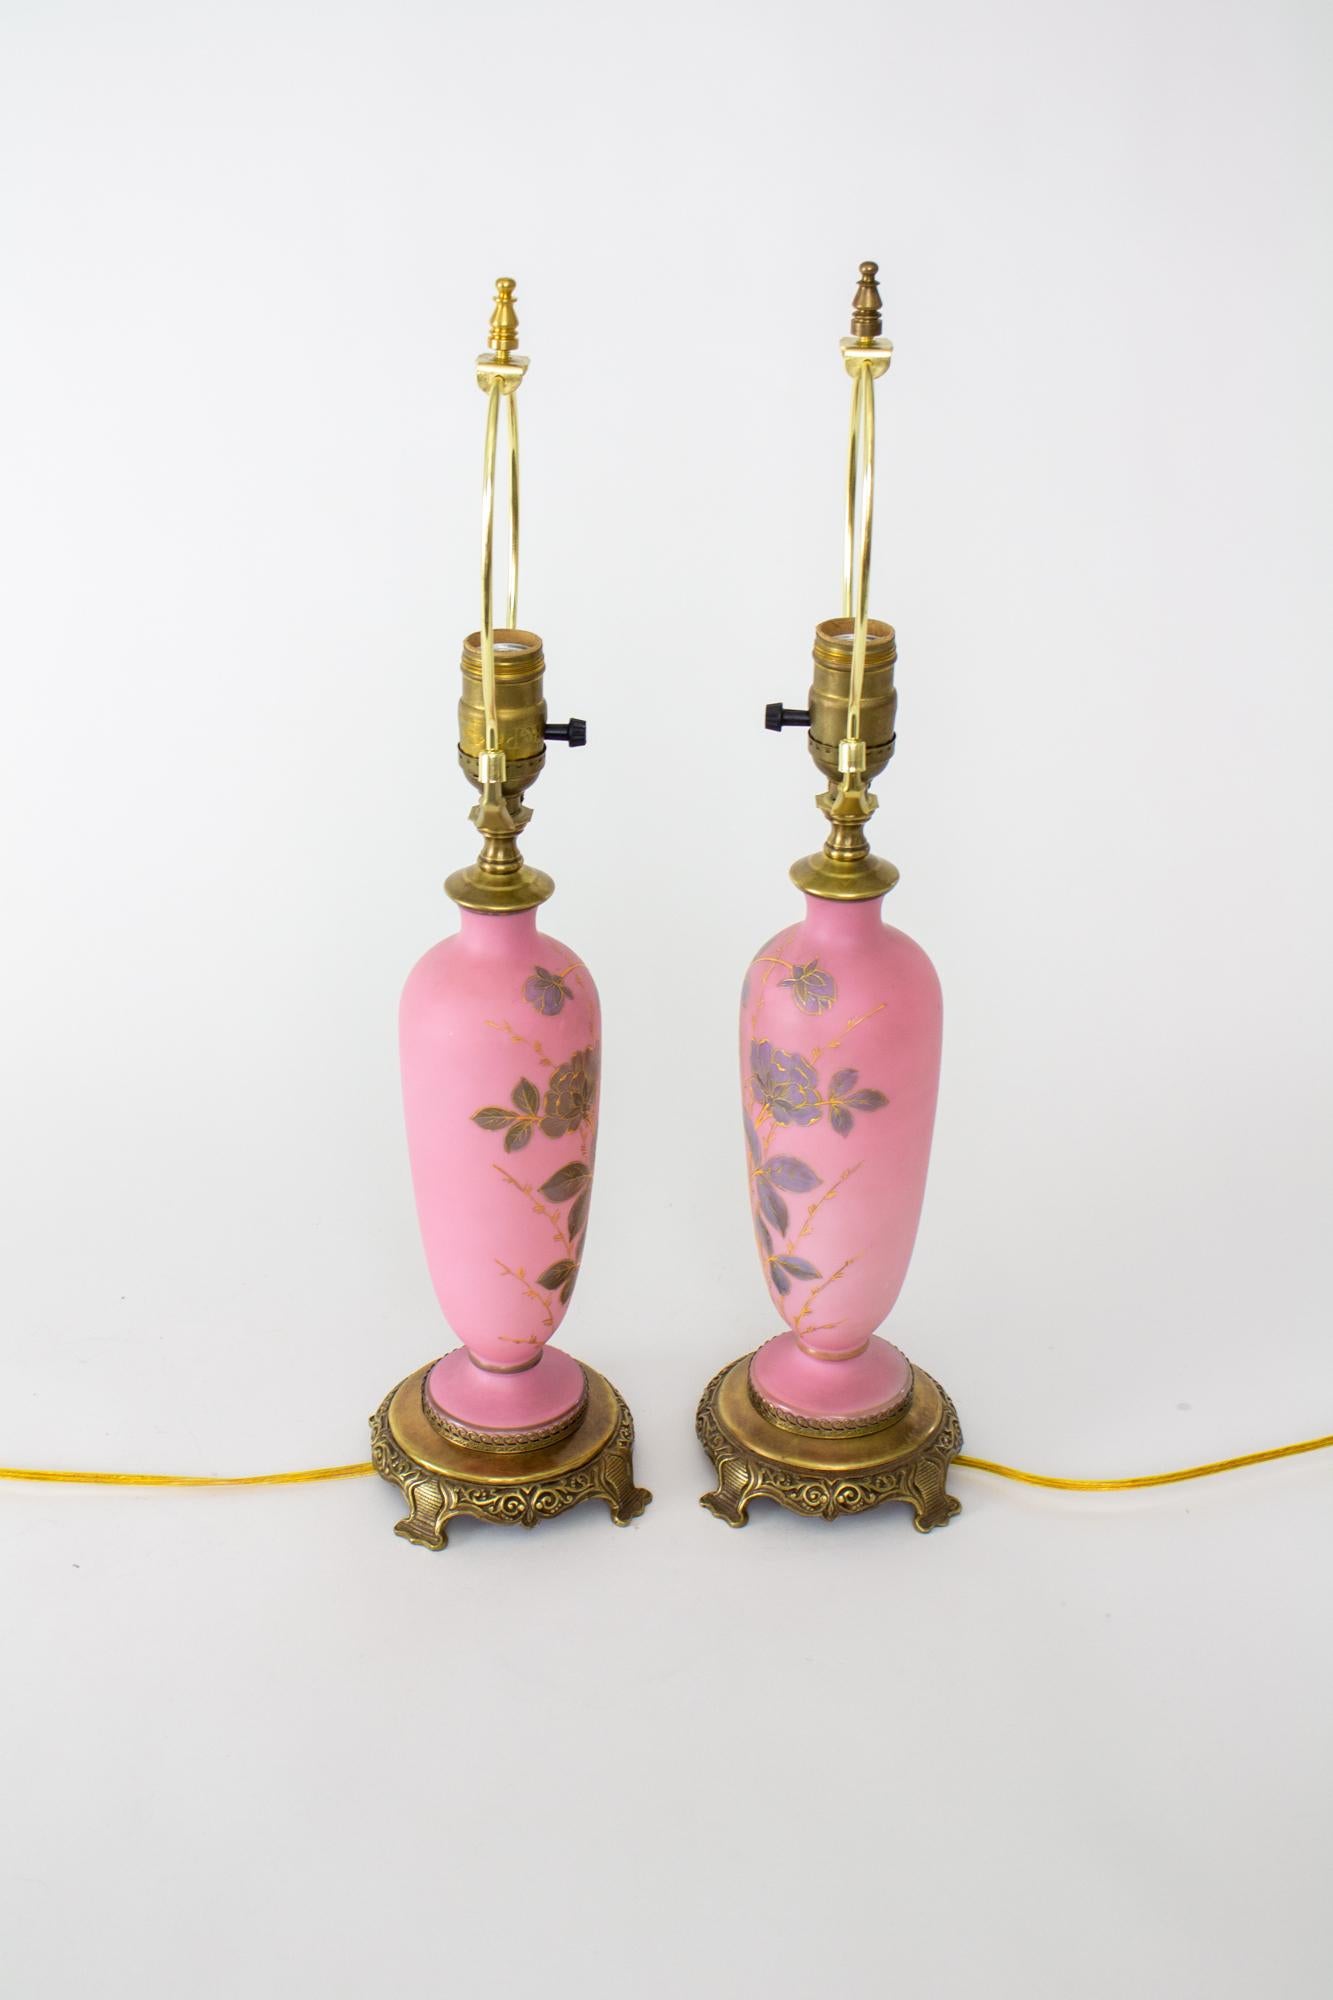 Late 19th Century Austrian pink table lamps - a pair. These lamps are made of a pink glass in a vase form. They are decorated with purple painted flowers with raised gold detail. A dark cold painted band circles the stem and base. The lamps are